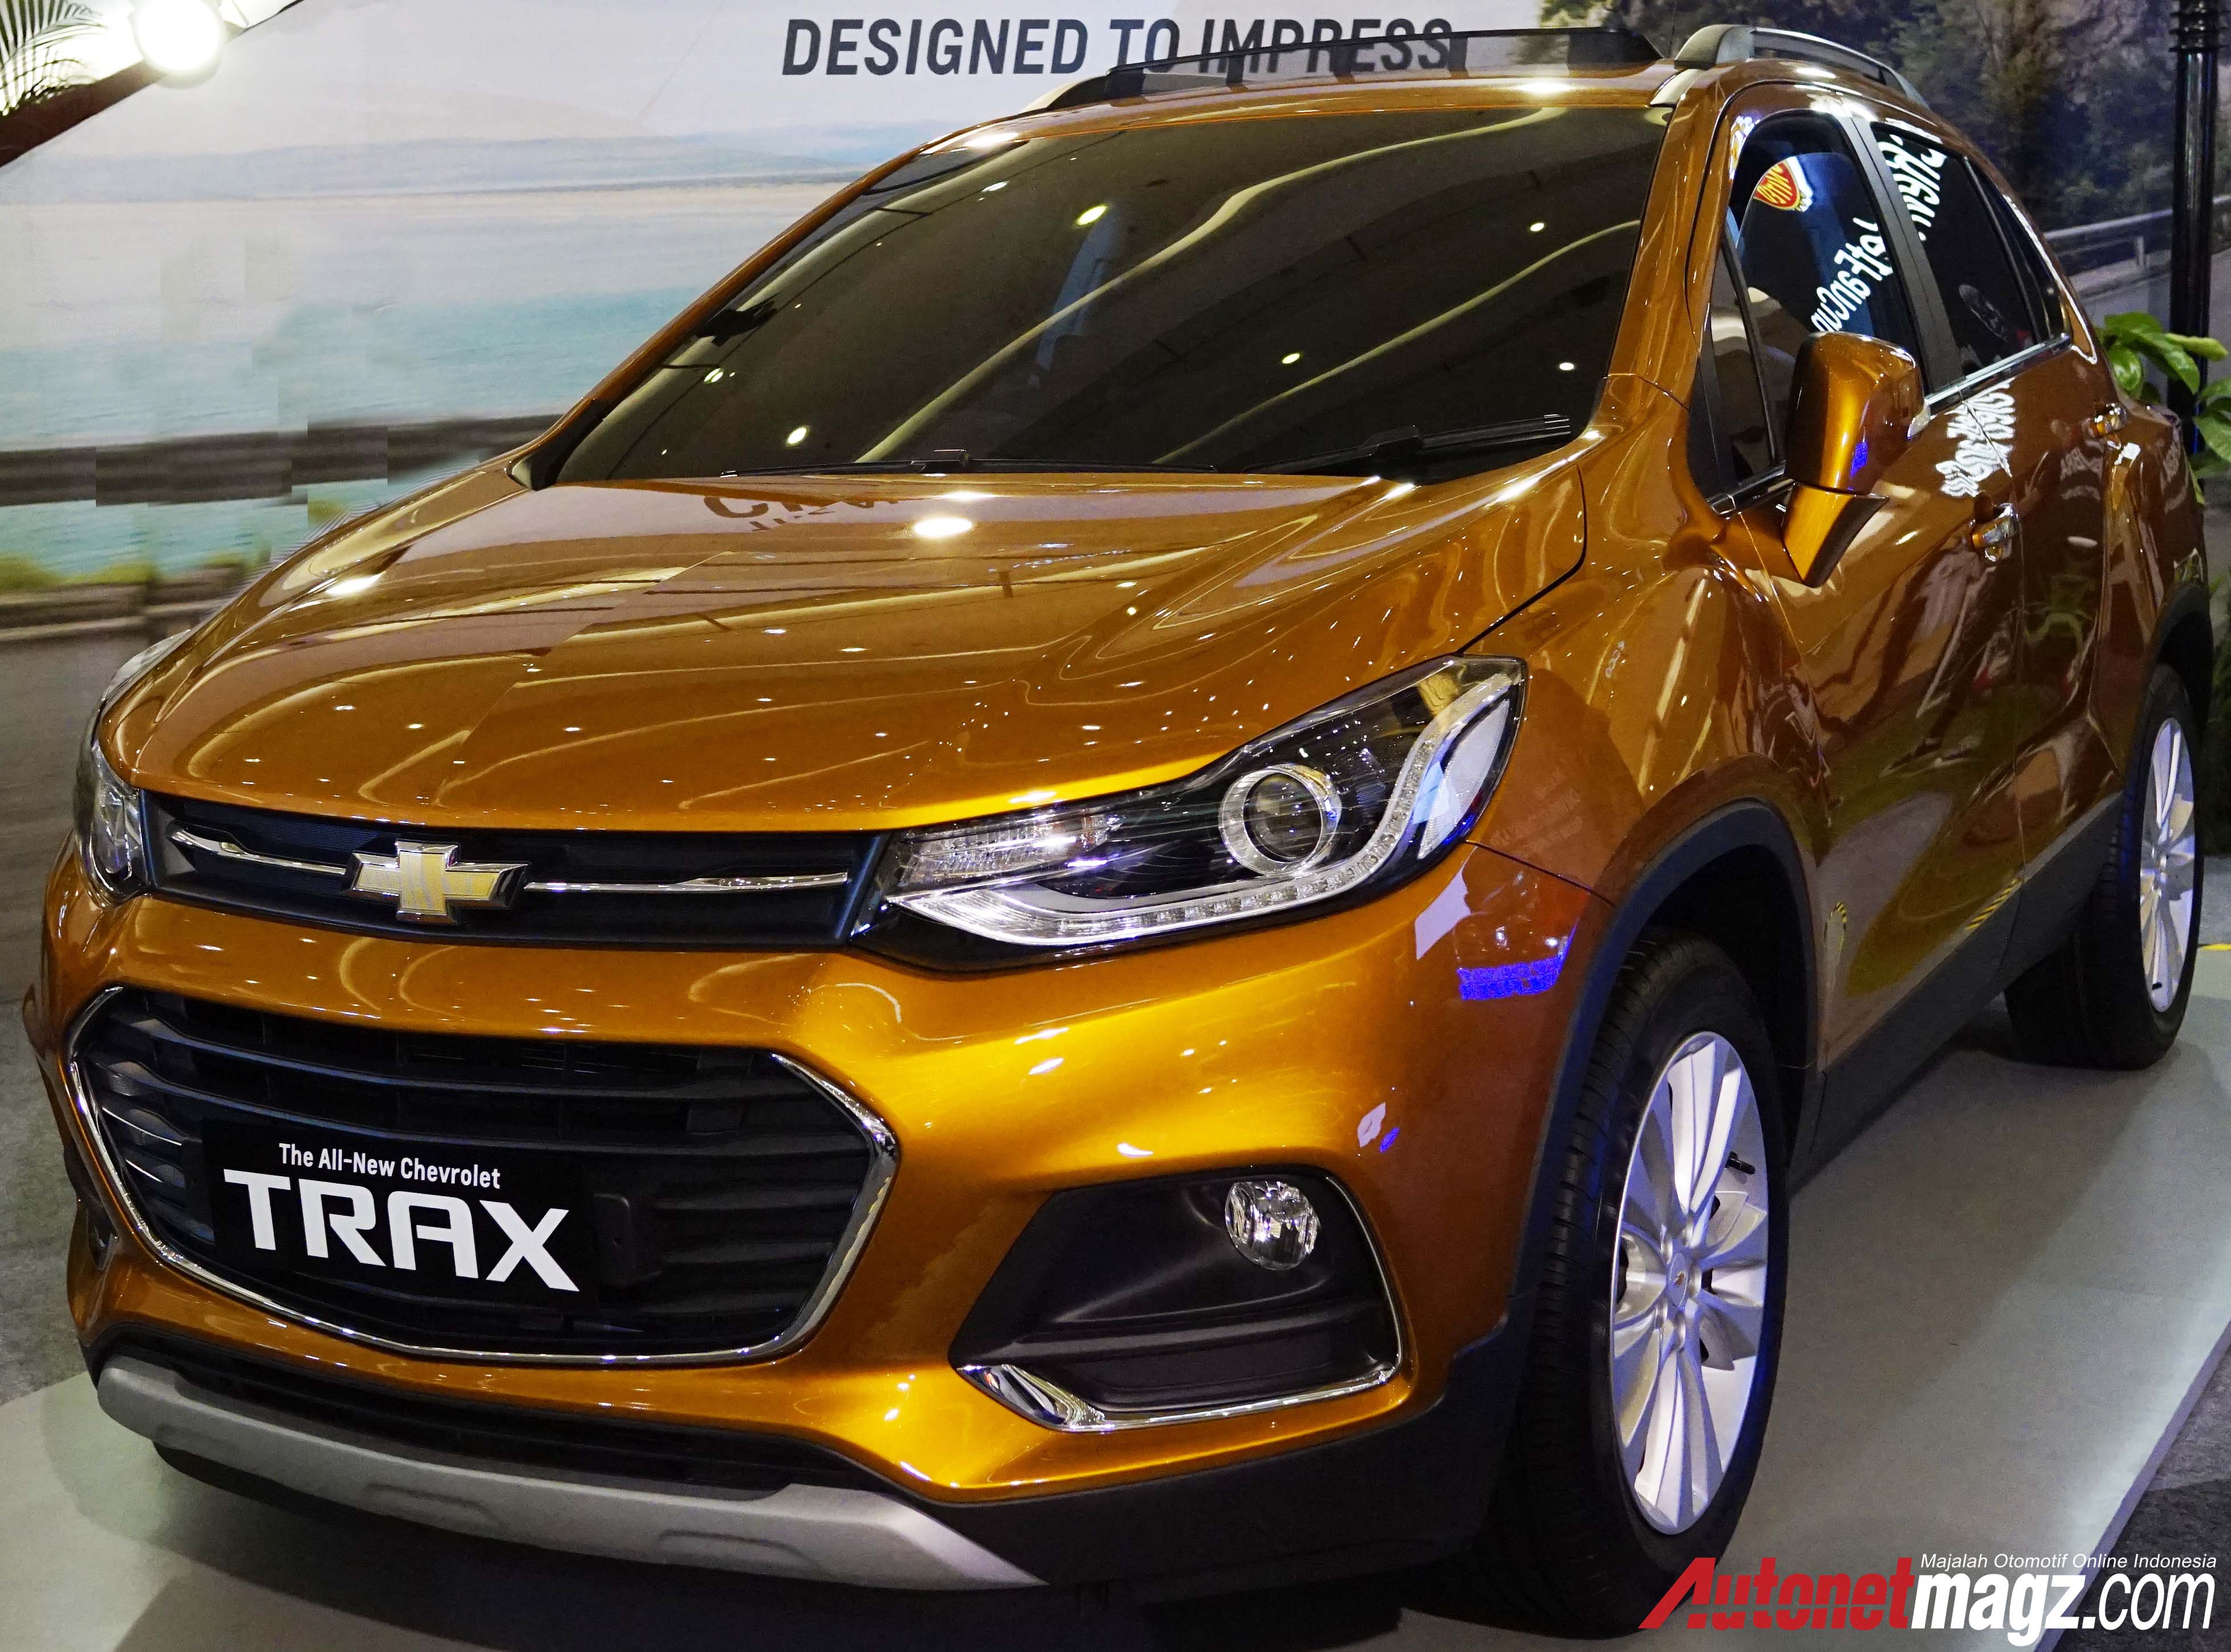 Chevrolet, _DSC3730 copy: First Impression Review New Chevrolet Trax Facelift 2017